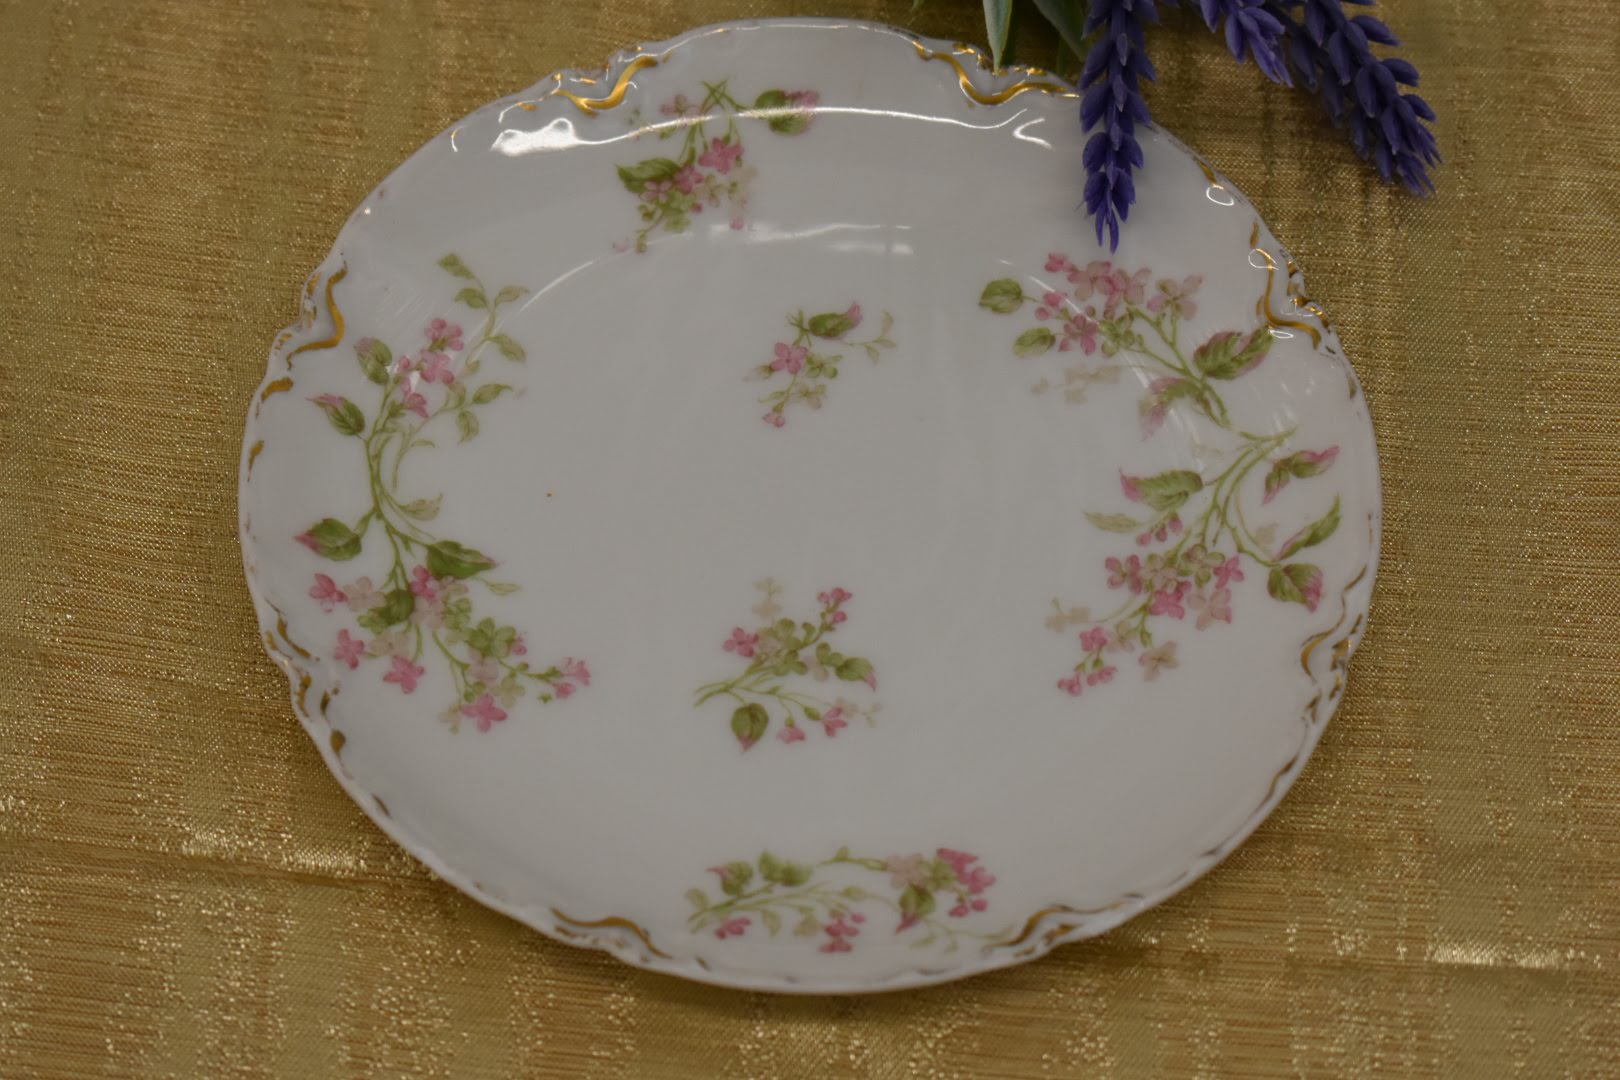 Limoges Haviland - Fine Porcelain China - Cookie Plates And Creamer - Pink Floral Pattern With Gold Trim - From France